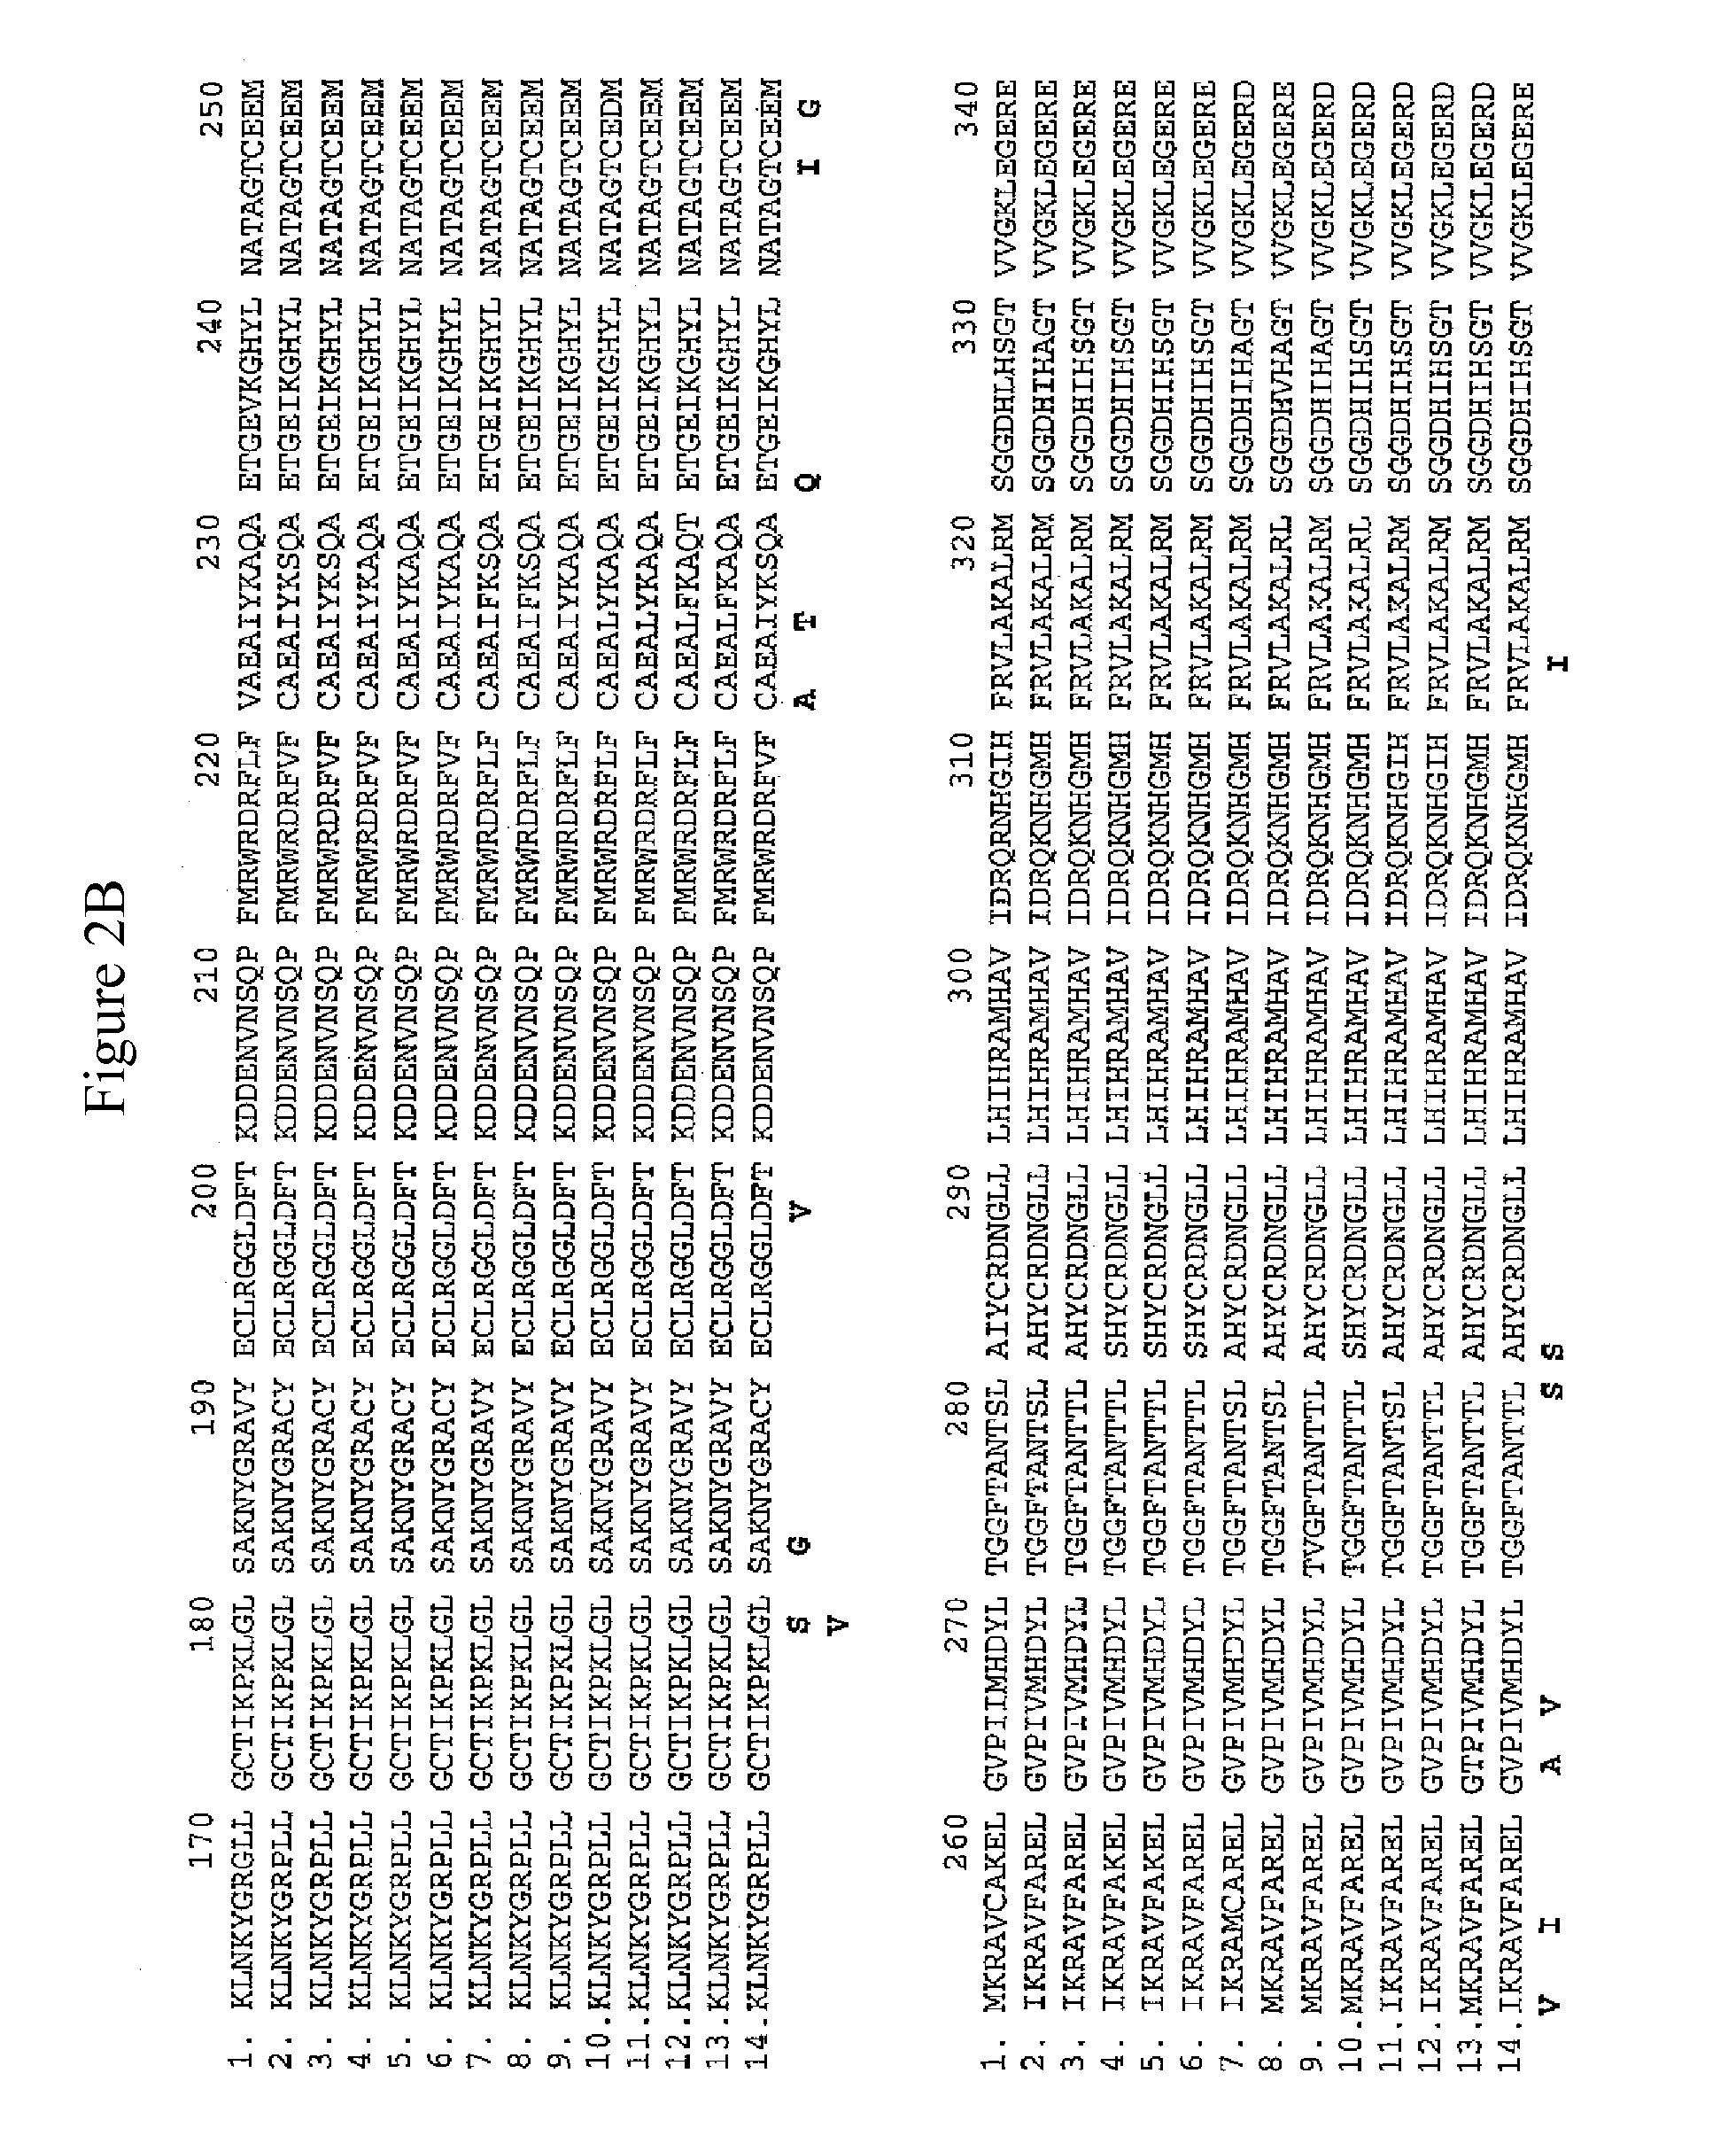 Methods of identifying and creating rubisco large subunit variants with improved rubisco activity, compositions and methods of use thereof